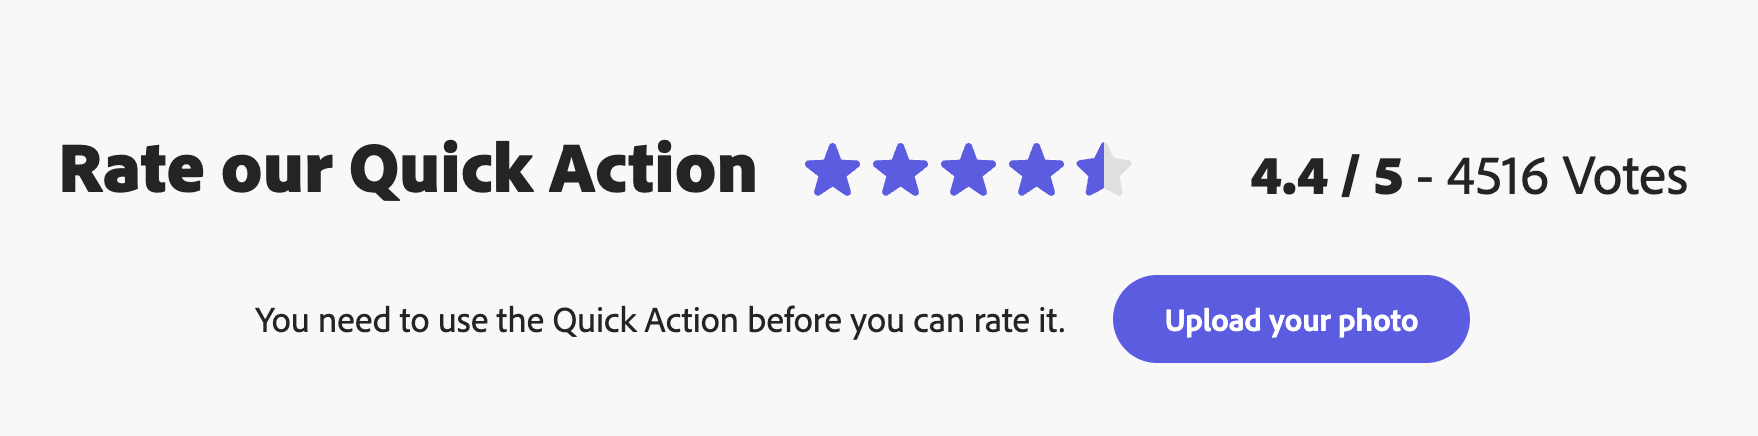 Star rating on Adobe's landing page